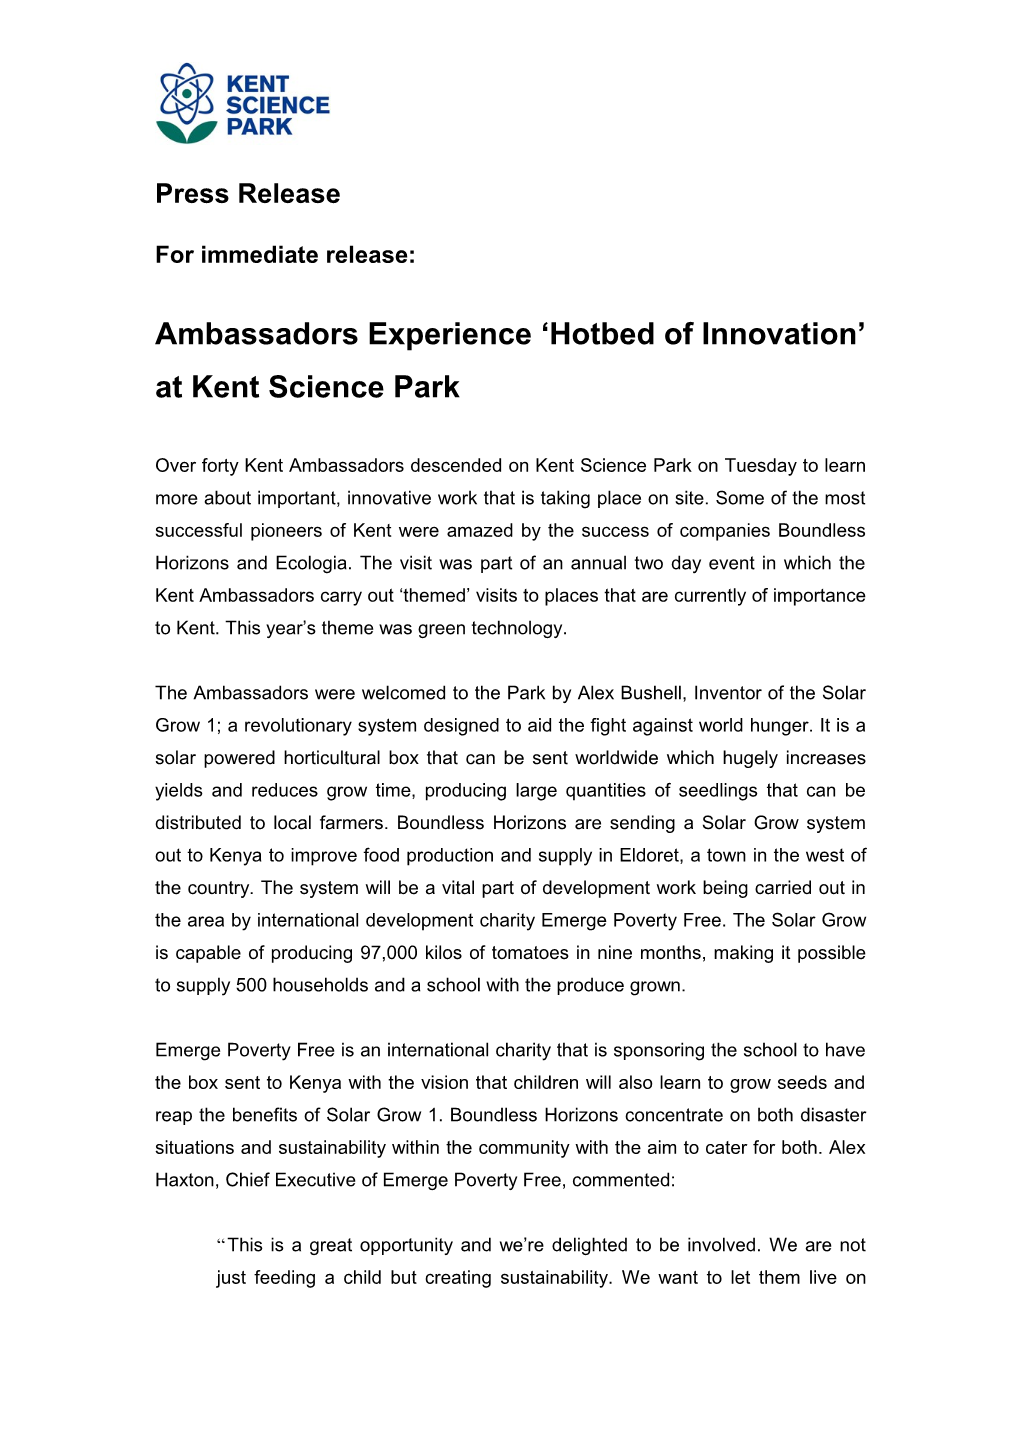 Ambassadors Blown Away by Visit to Kent Science Park